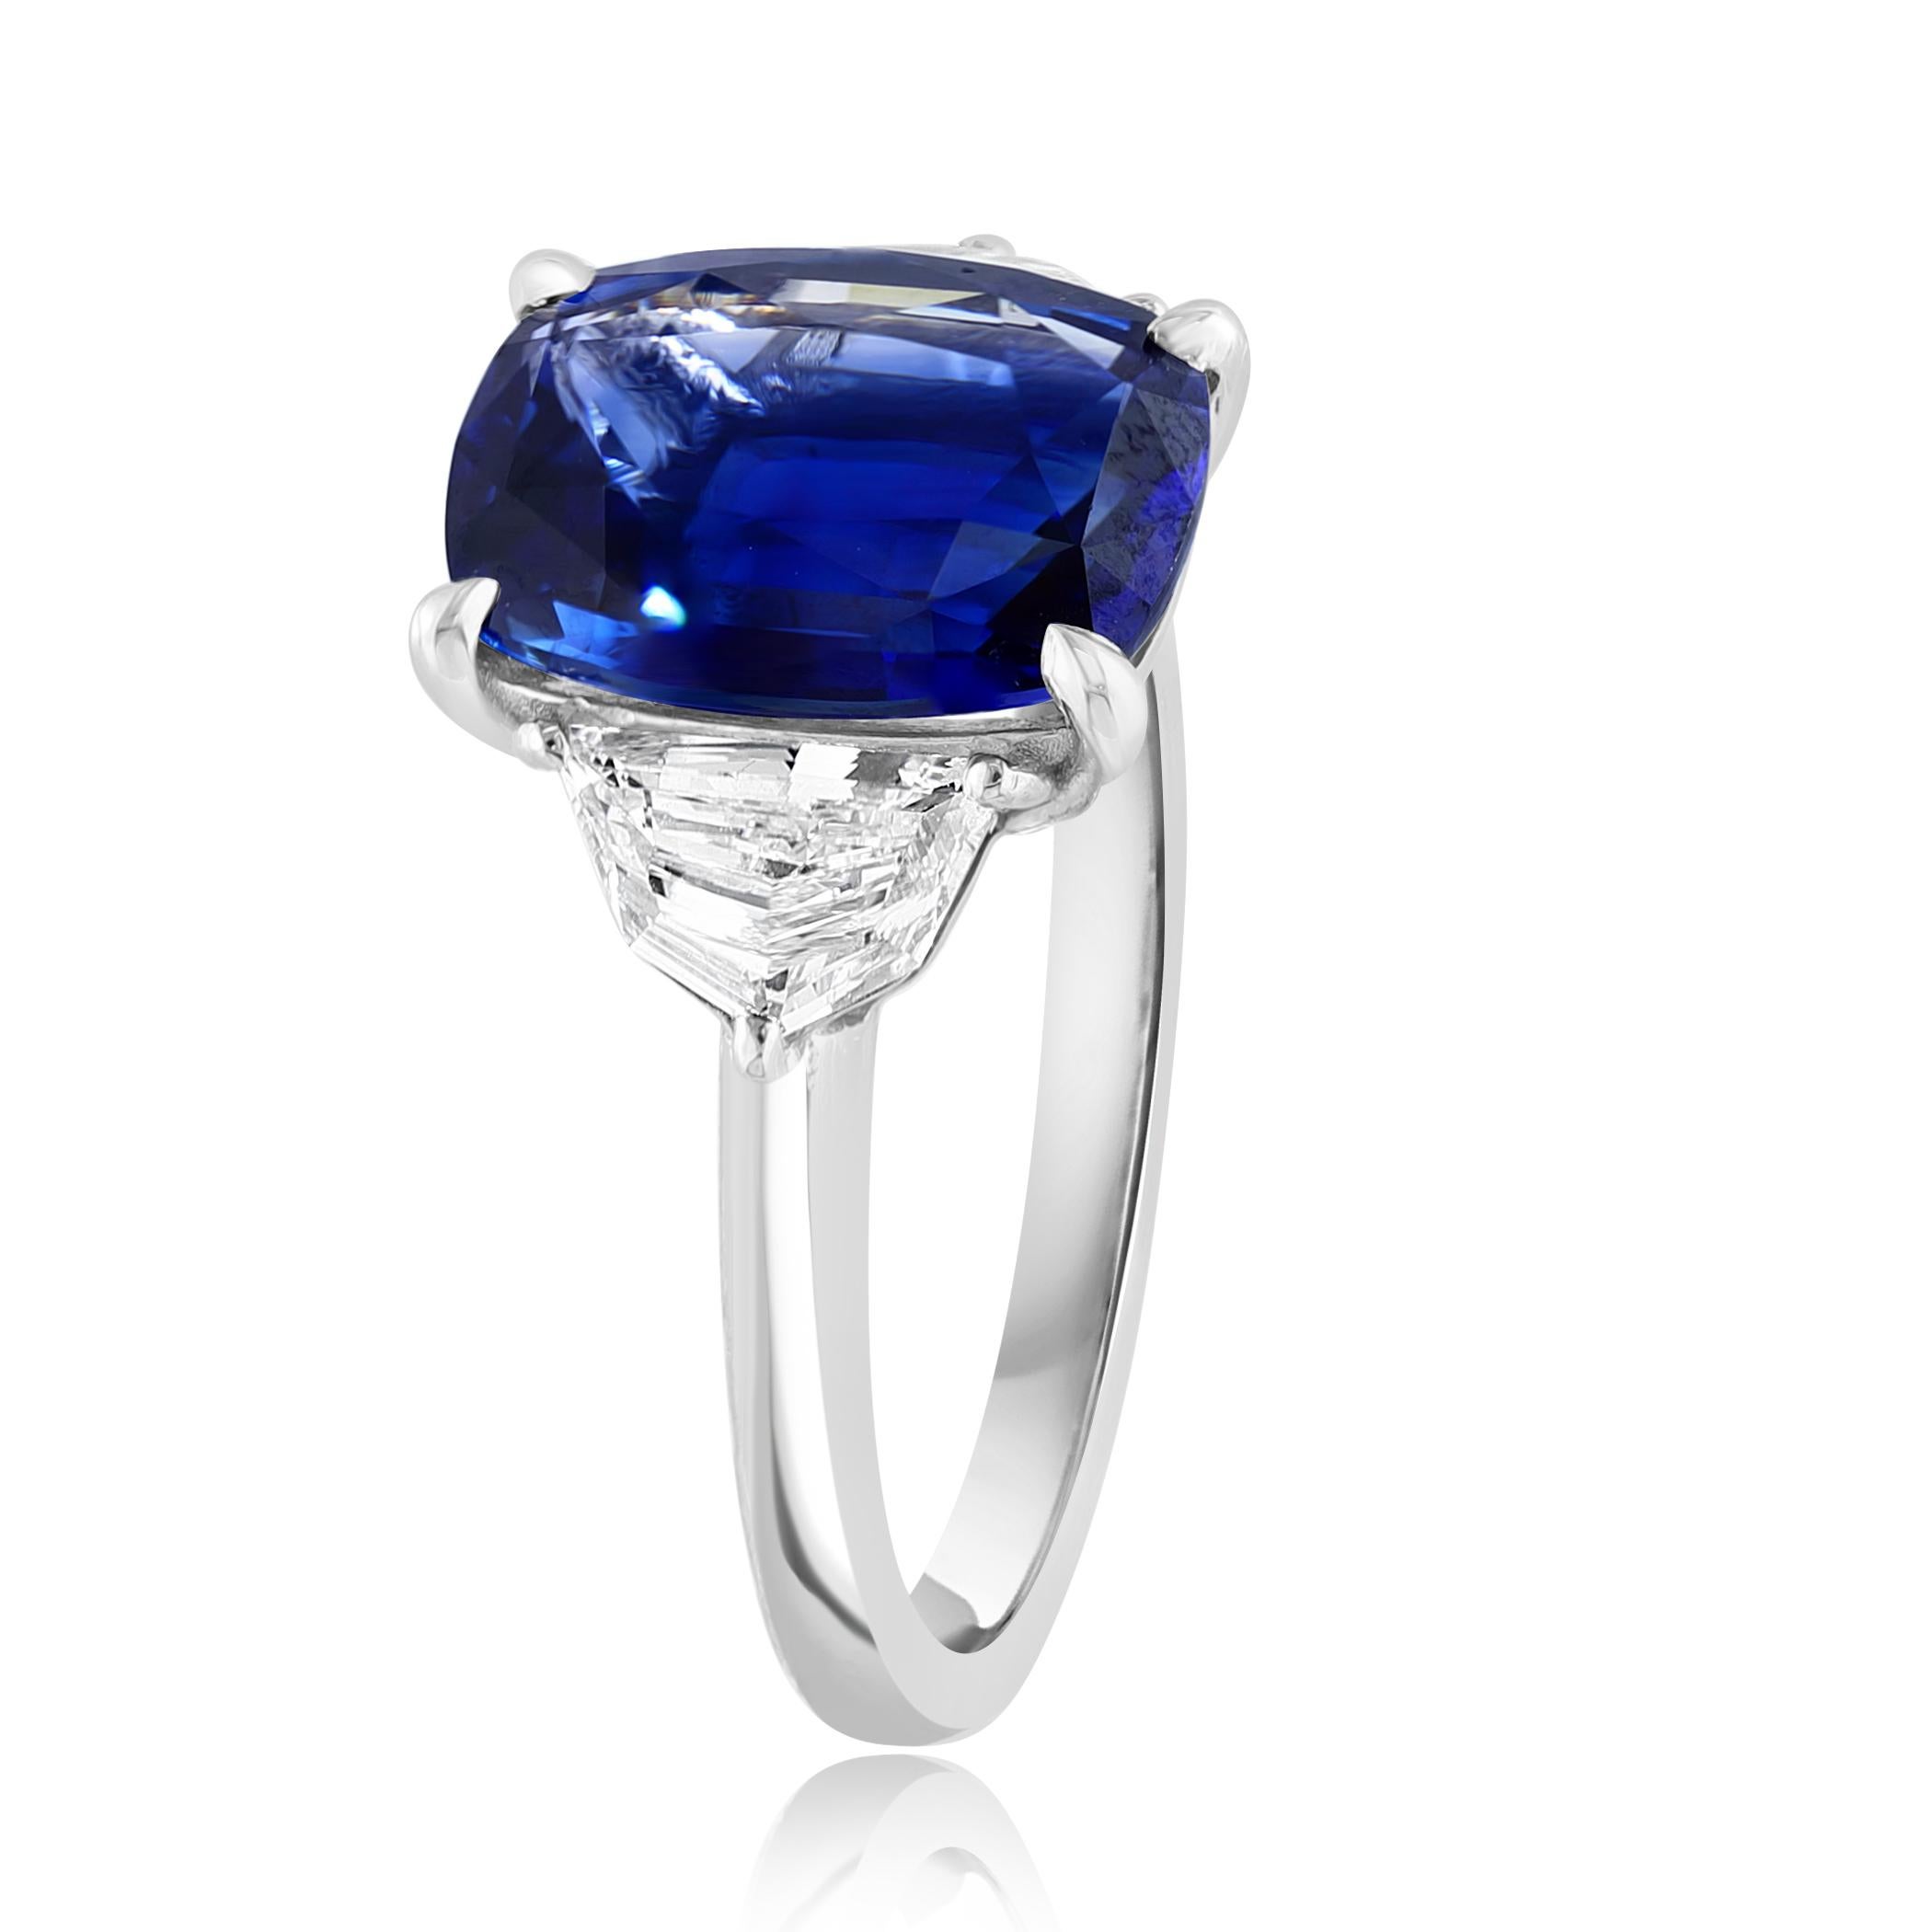 Certified 3.54 Carat Cushion Cut Blue Sapphire Diamond 3-Stone Ring in Platinum In New Condition For Sale In NEW YORK, NY